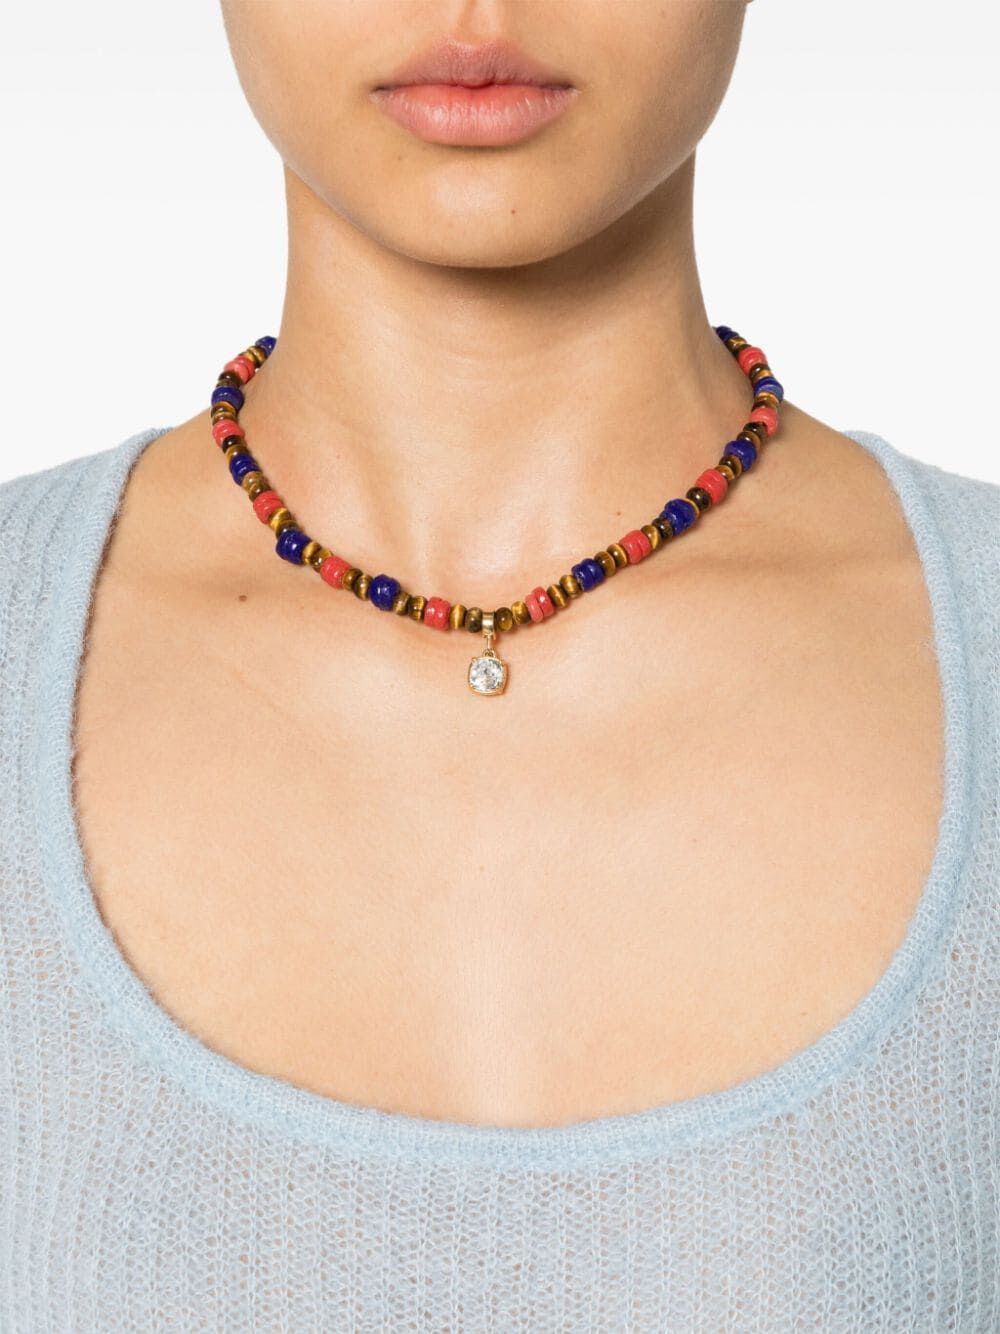 WALES BONNER-DREAM NECKLACE-UA23NK01 349 RED MULTI